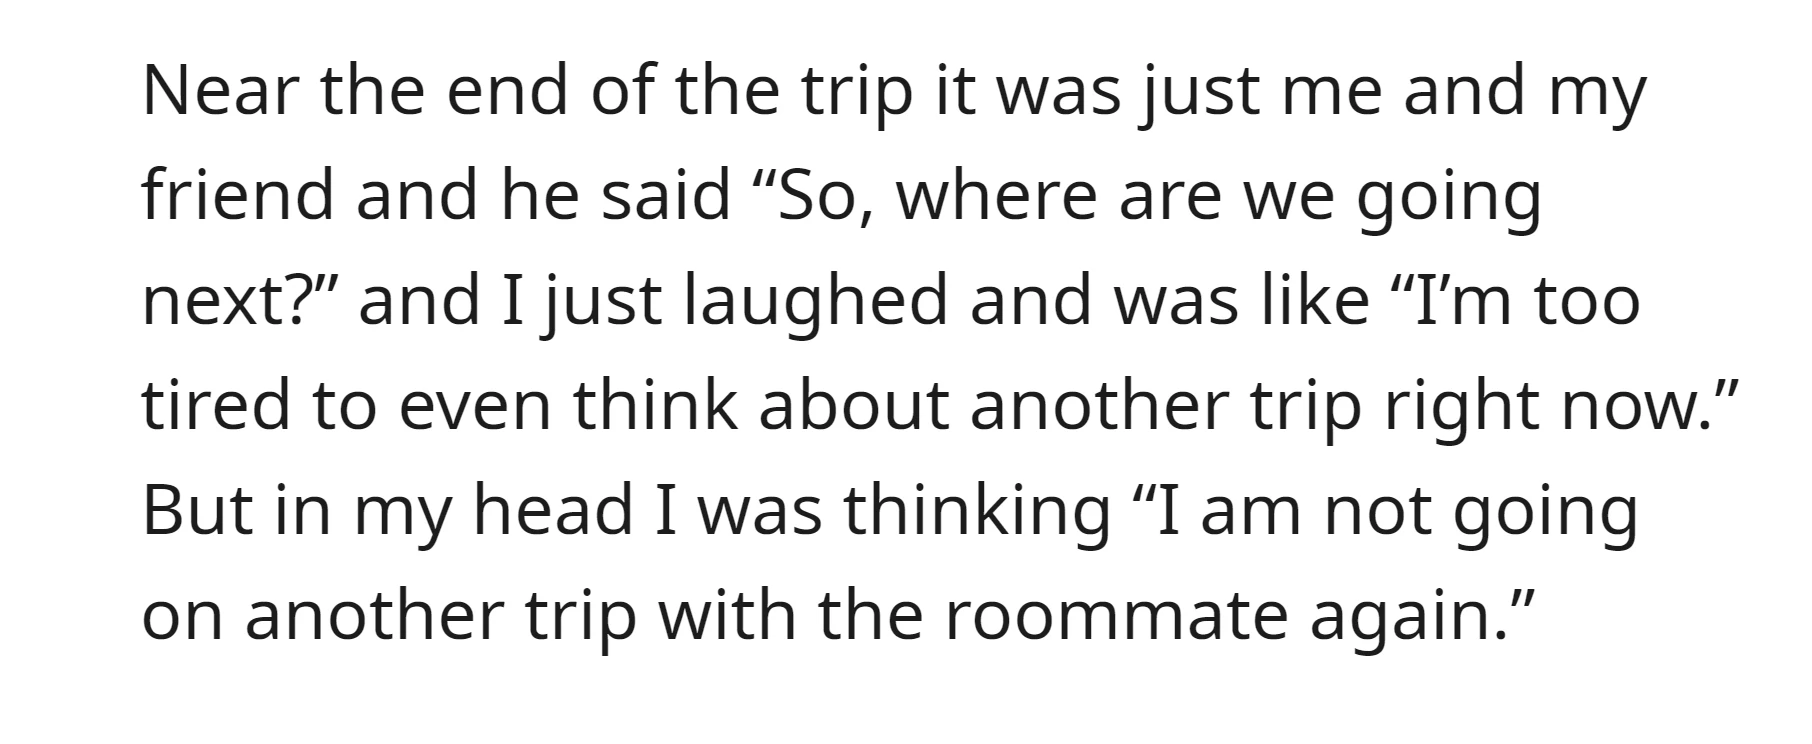 OP thought that she would not go on another trip with his roommate